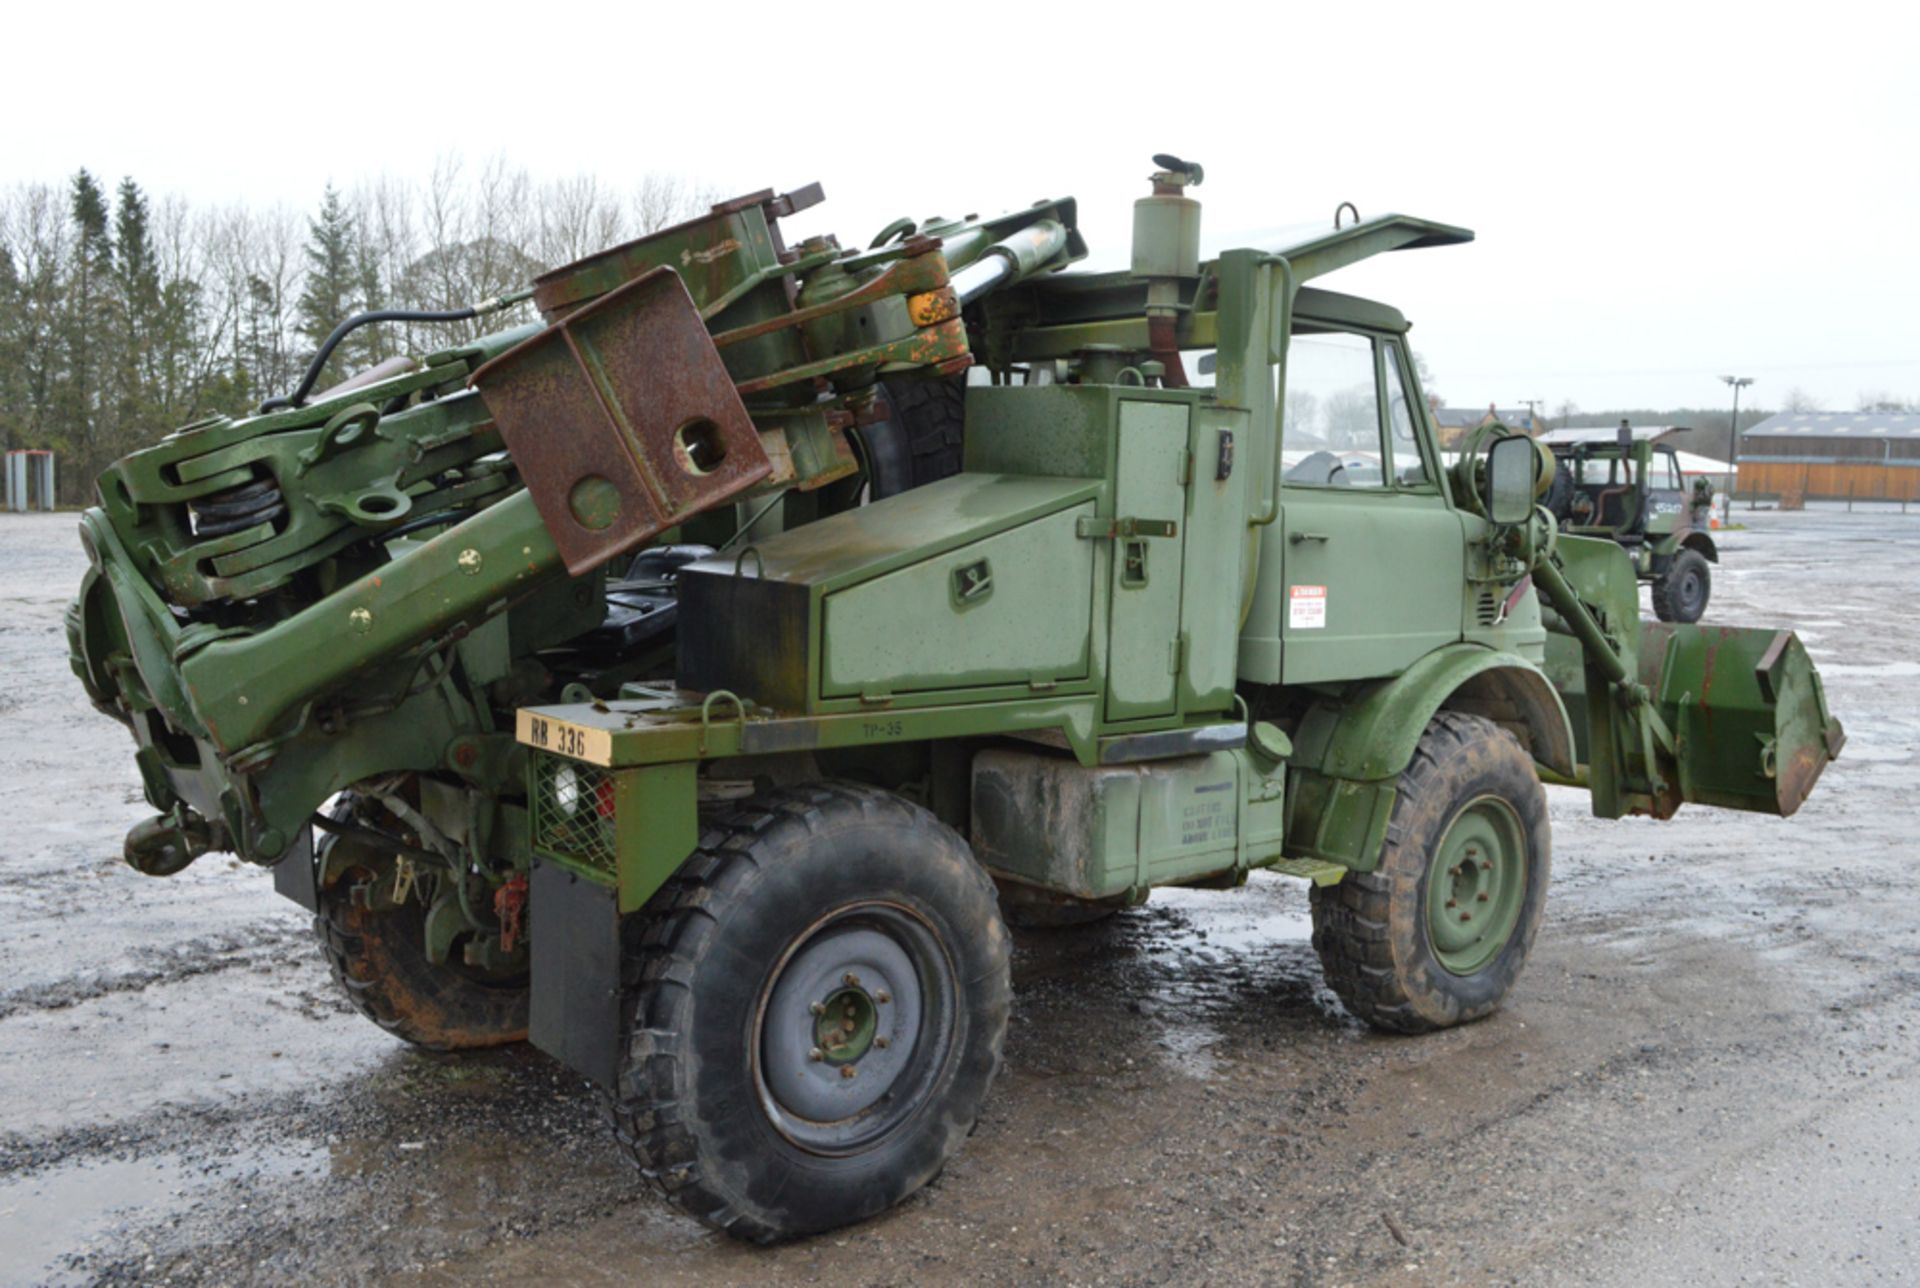 Mercedes Benz/Freightliner Unimog 419 4WD utility vehicle (Ex US Army) Year: 1987 Serial Number: - Image 3 of 9